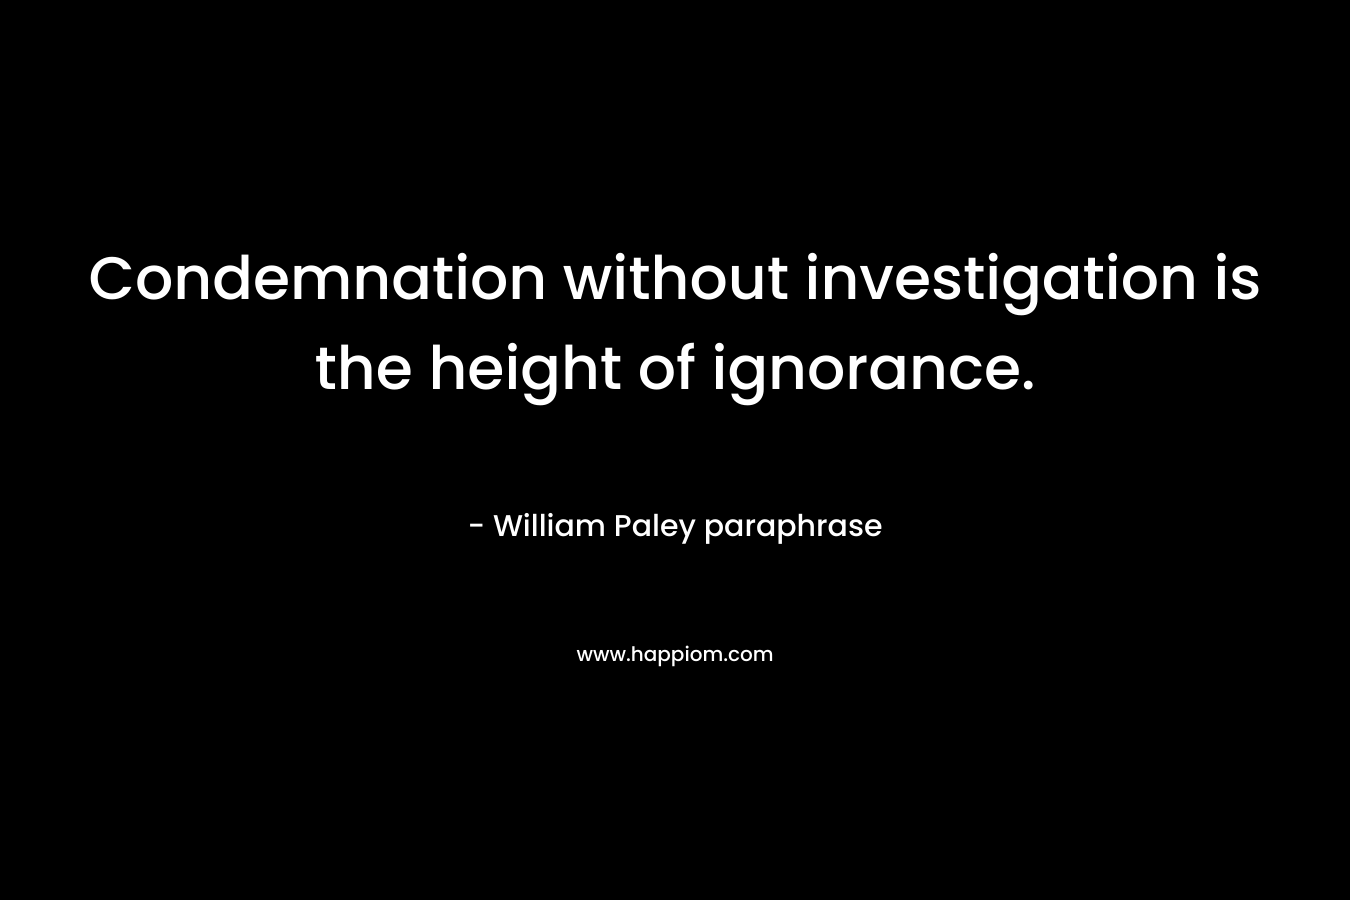 Condemnation without investigation is the height of ignorance.